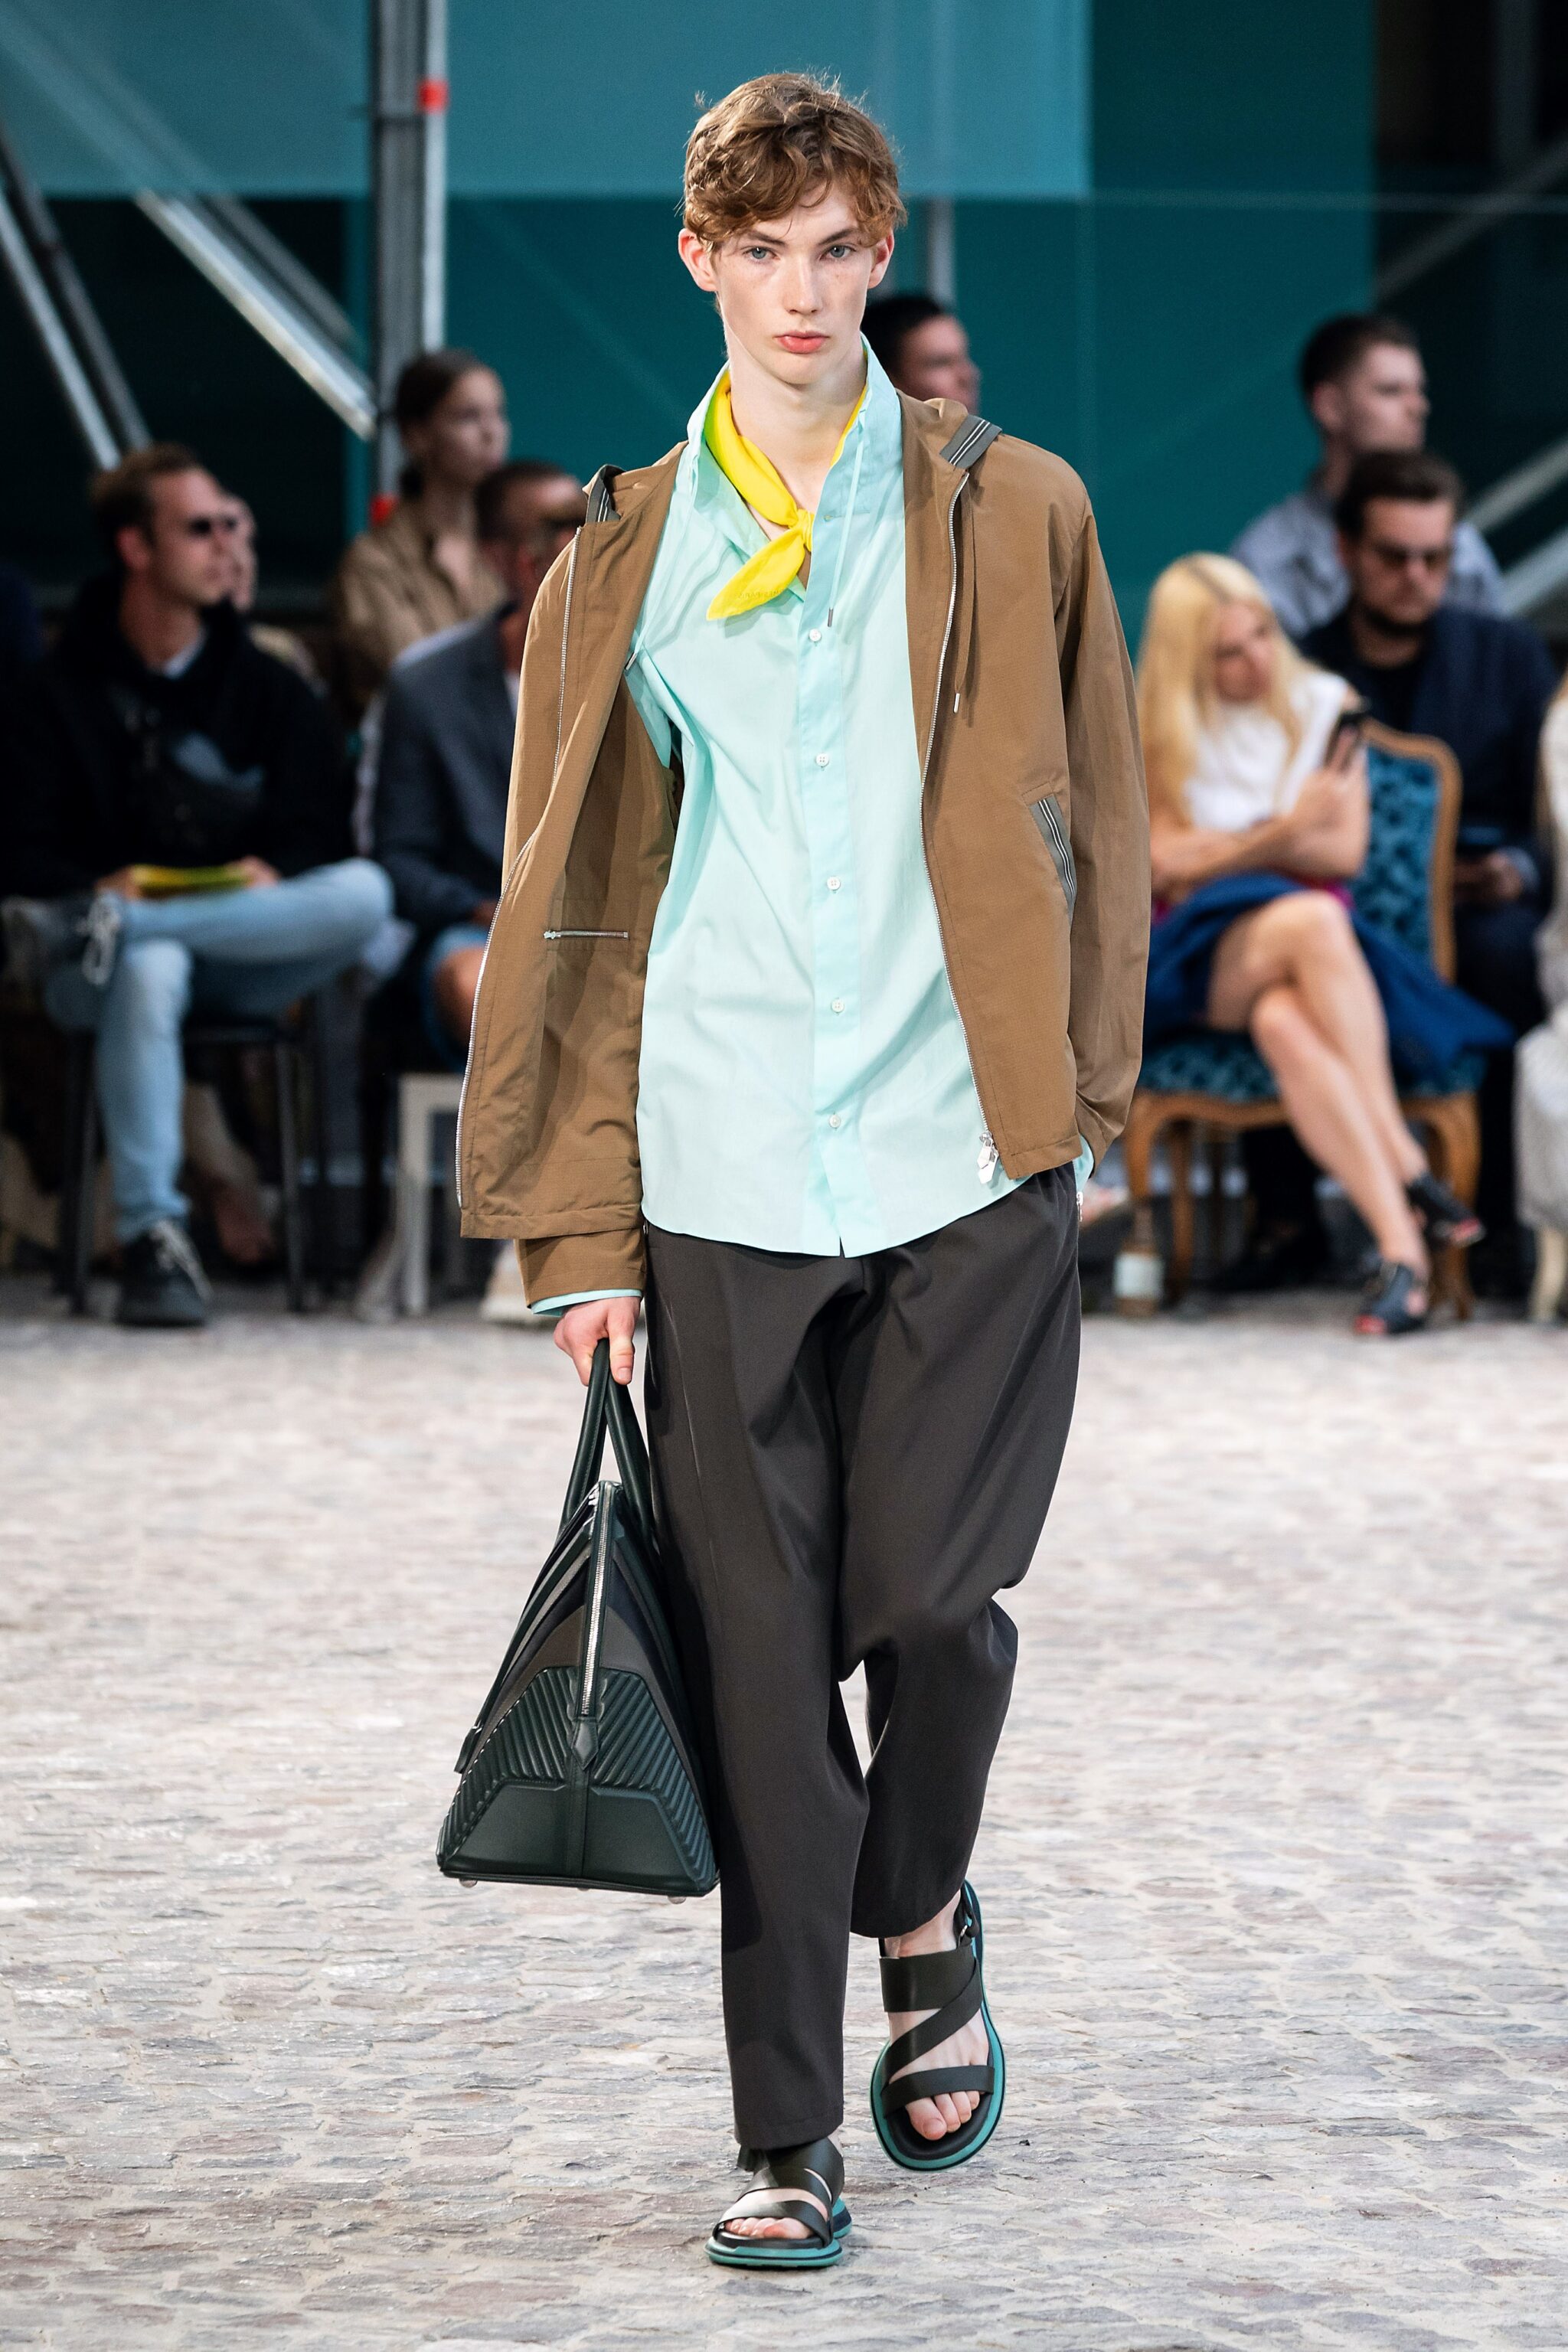 Hermès Spring/Summer 2020 Menswear Collection - Spotted Fashion